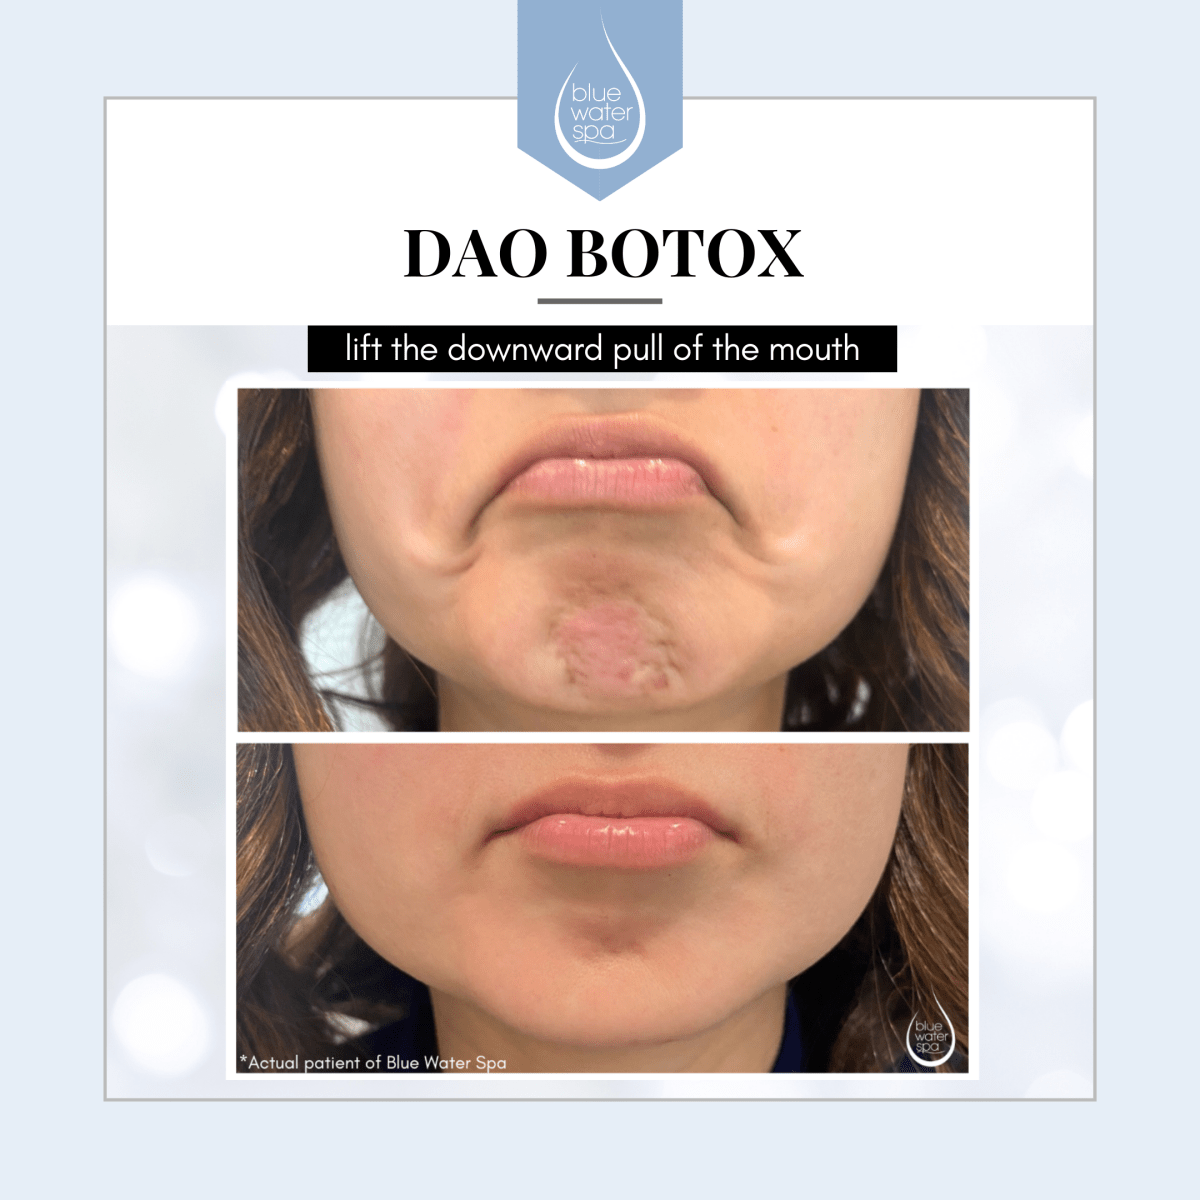 Botox for DAO Lines